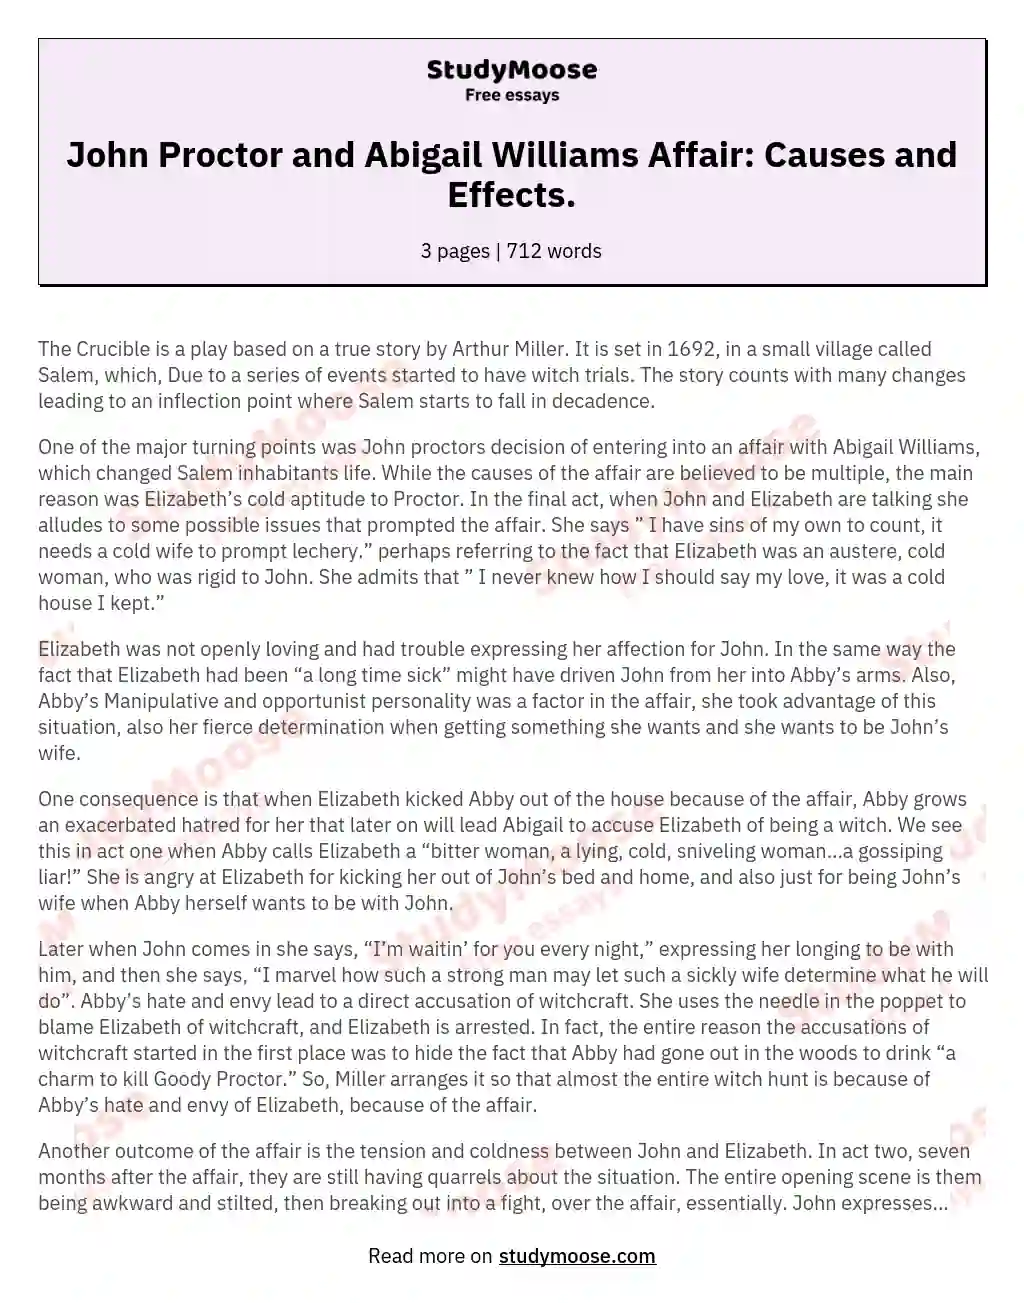 John Proctor and Abigail Williams Affair: Causes and Effects.